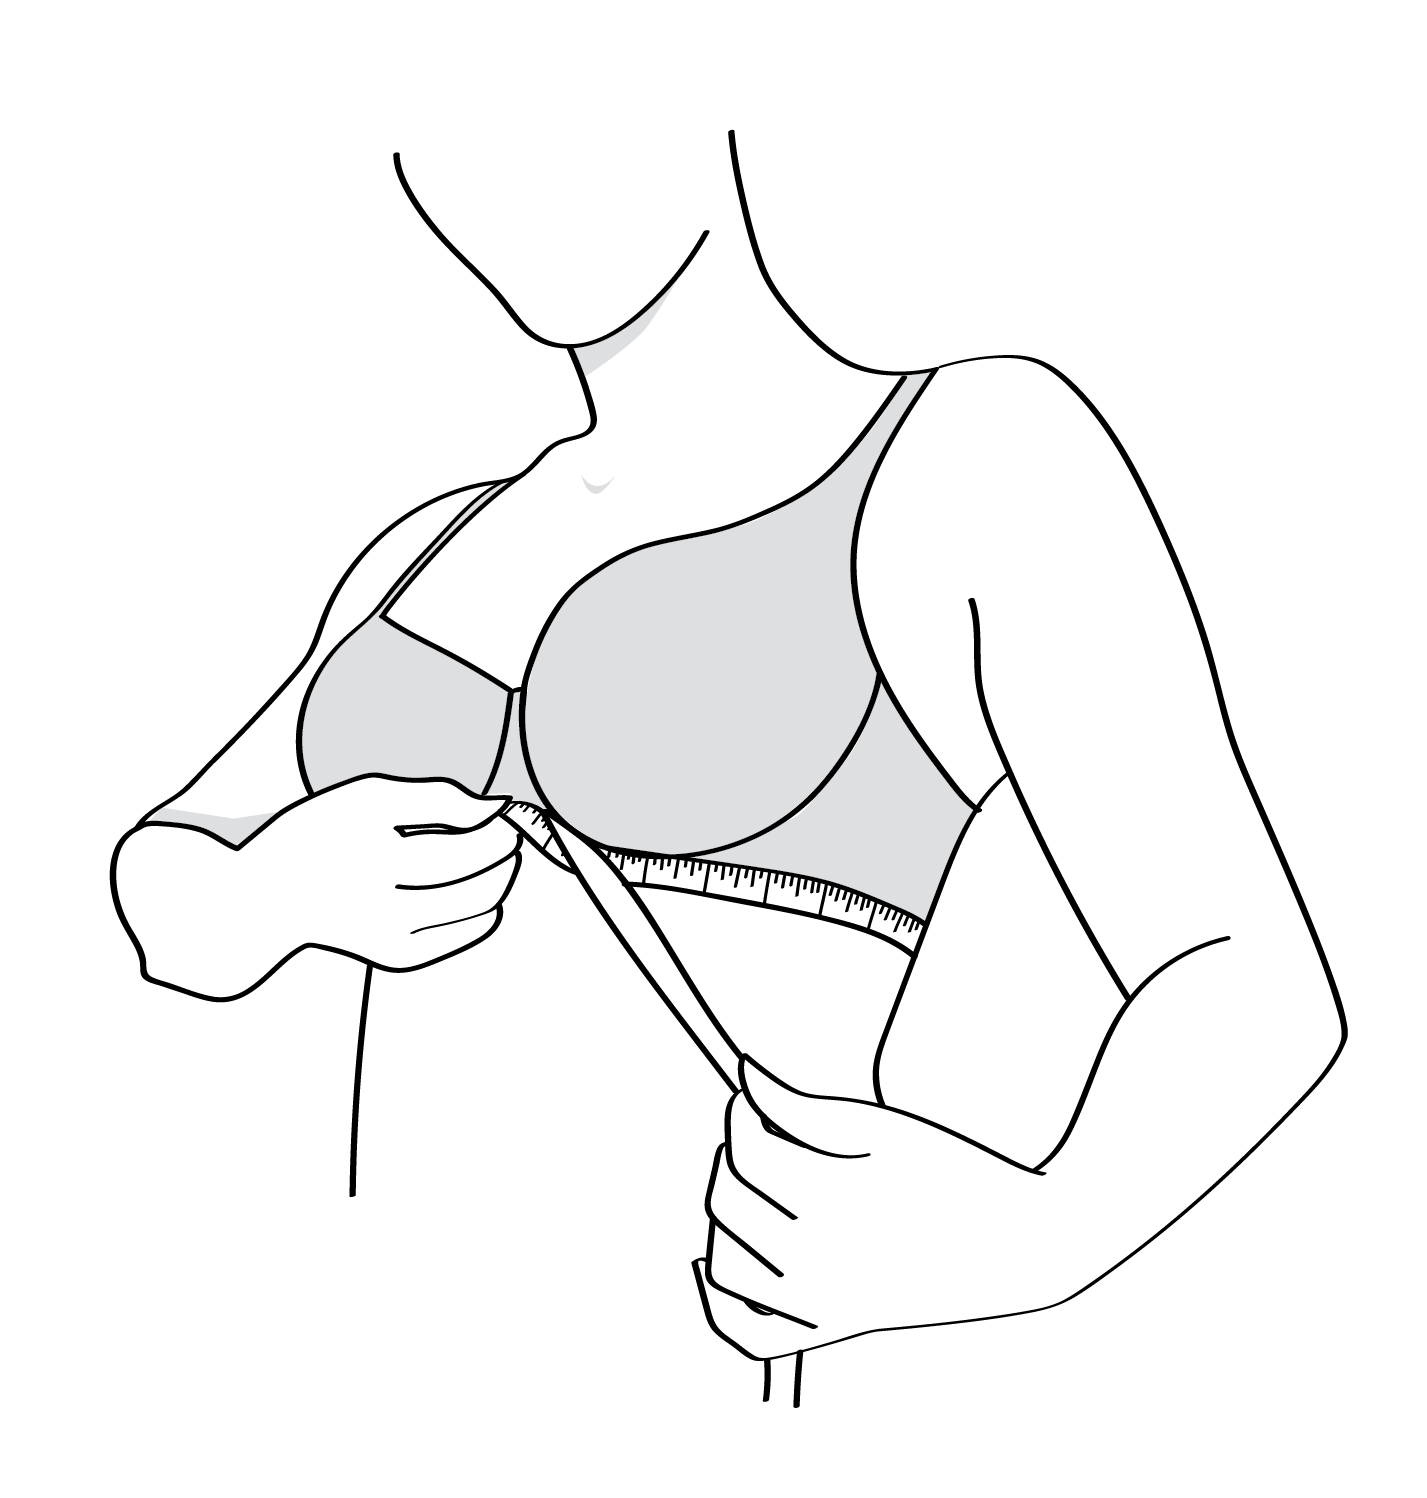 Bra Calculator Measuring Guide for finding your best bra fit Band Size